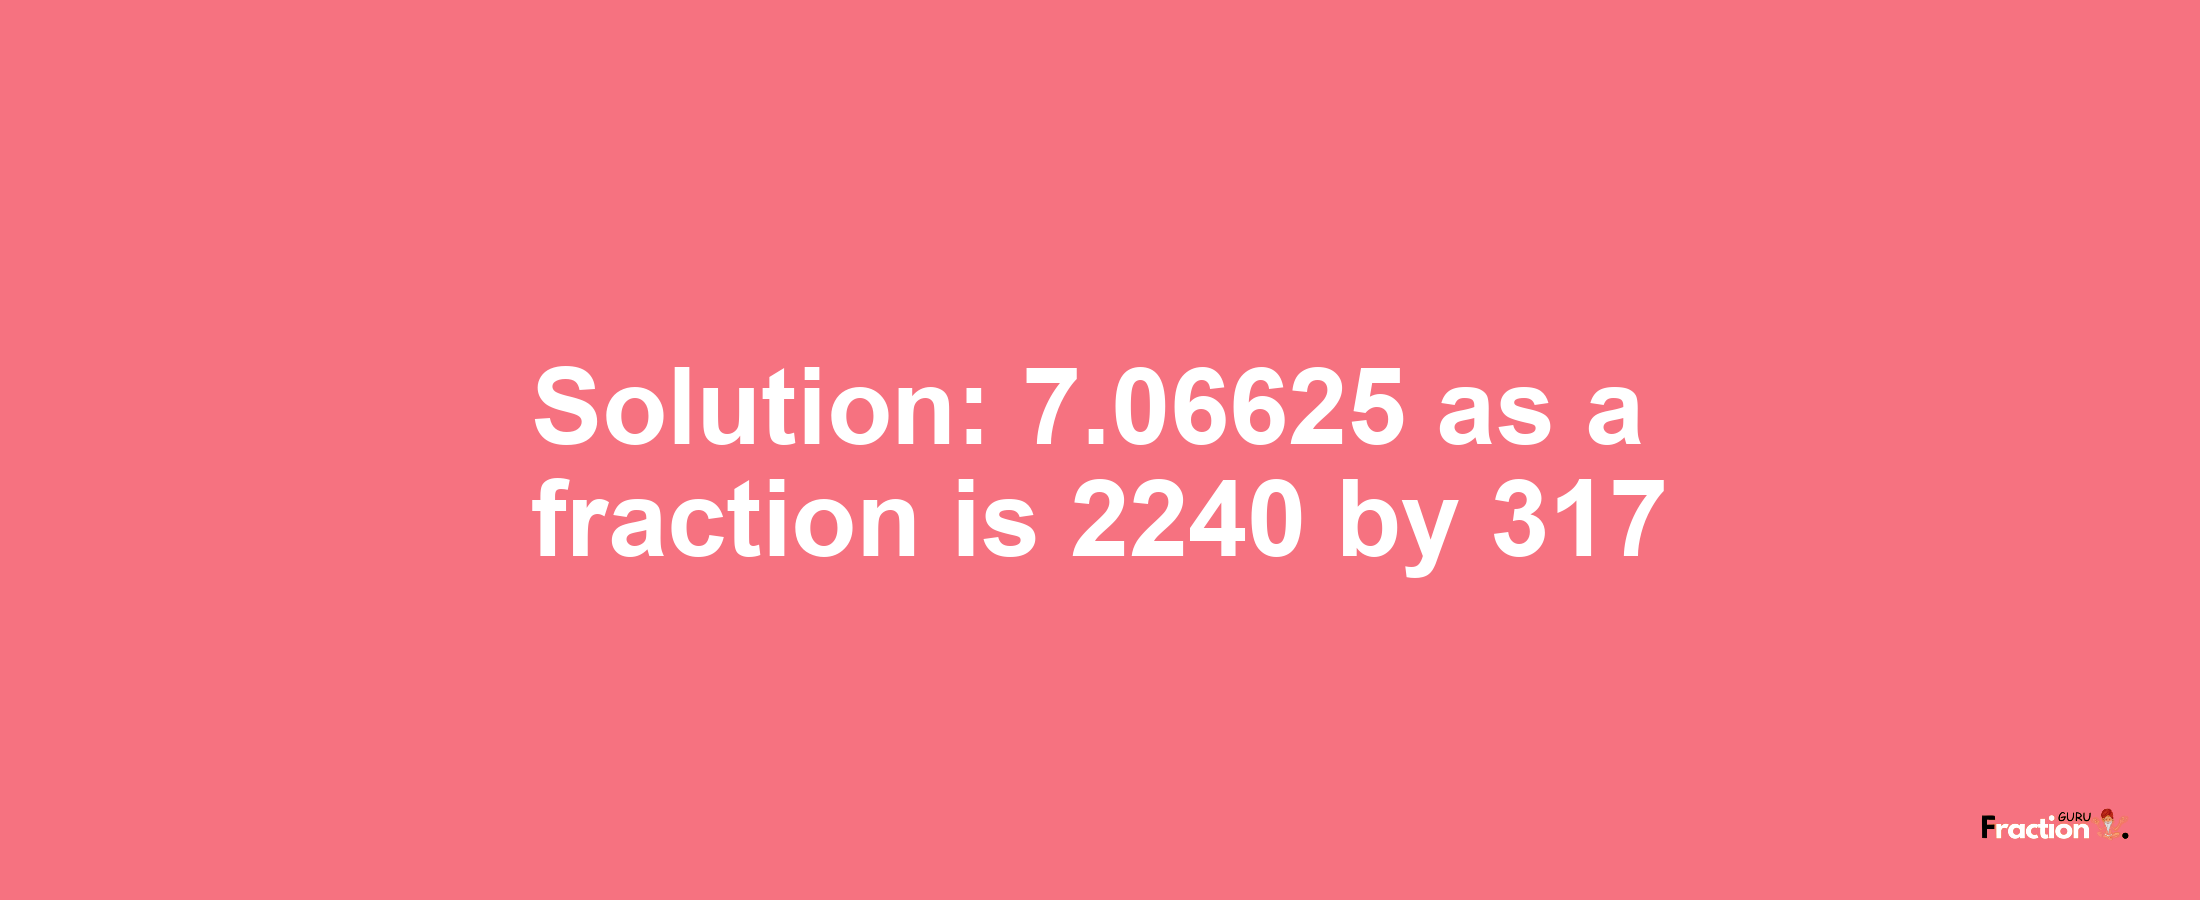 Solution:7.06625 as a fraction is 2240/317